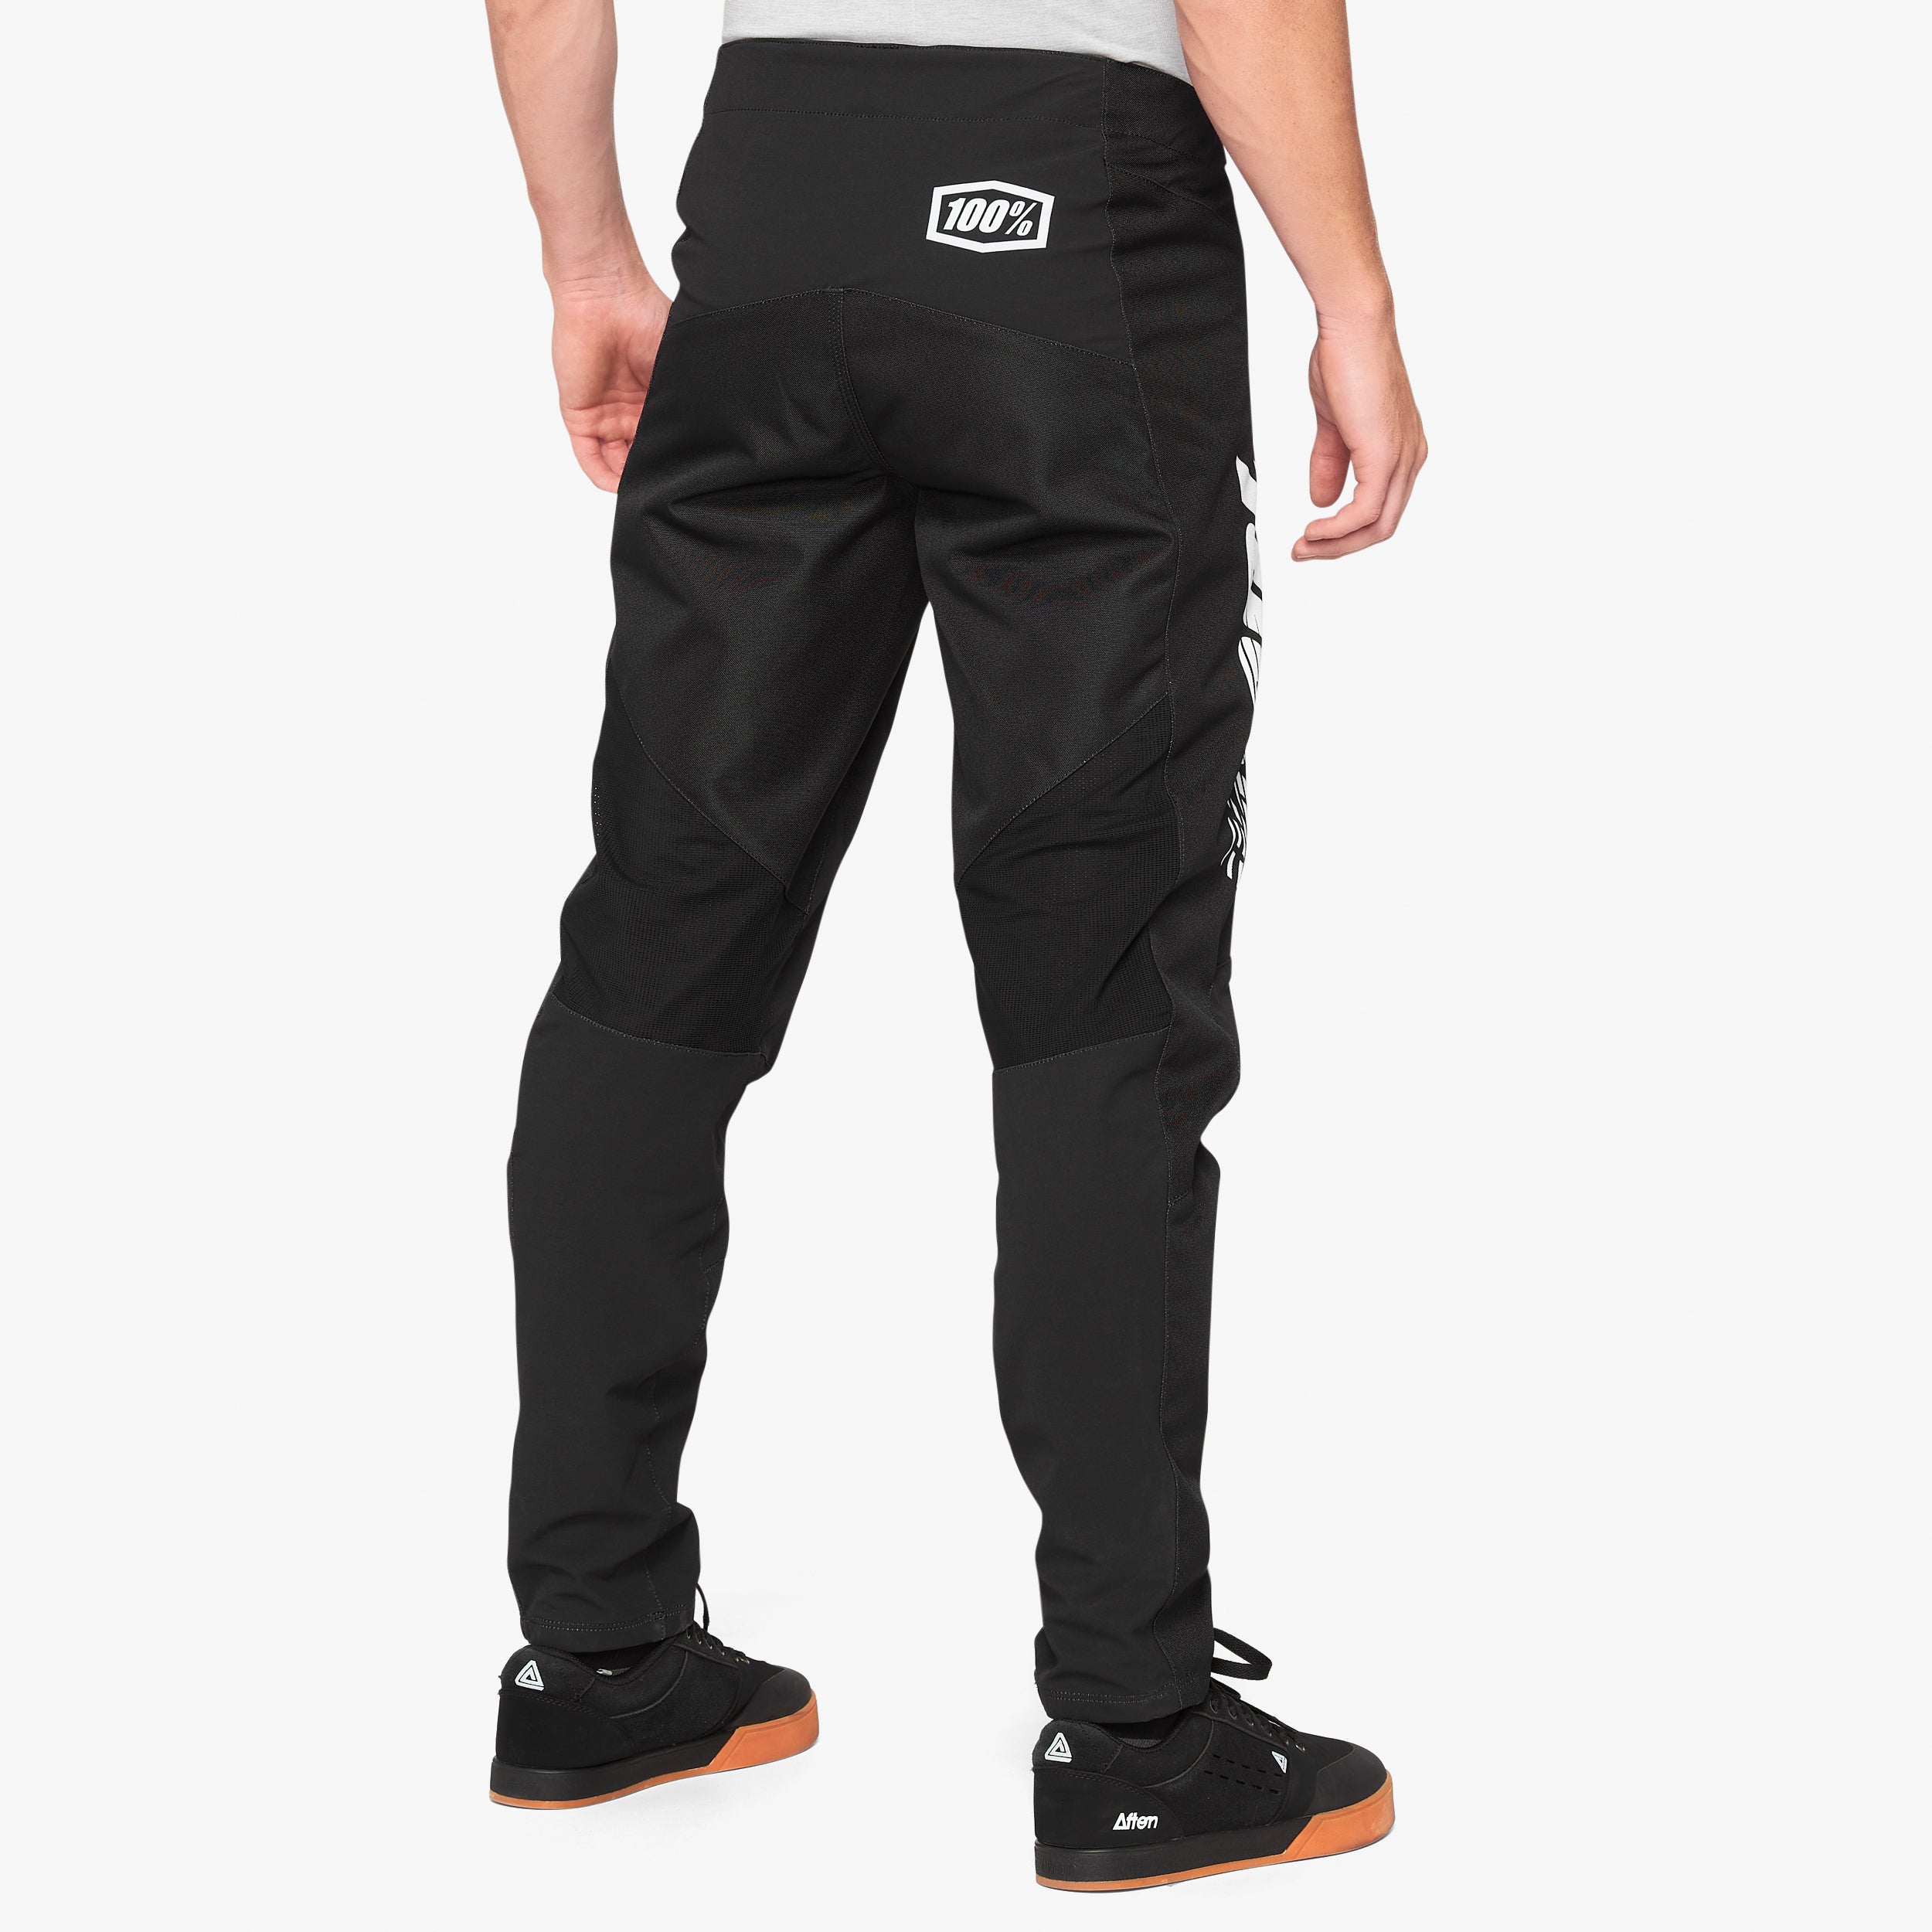 R-CORE Youth Pants Black - Secondary